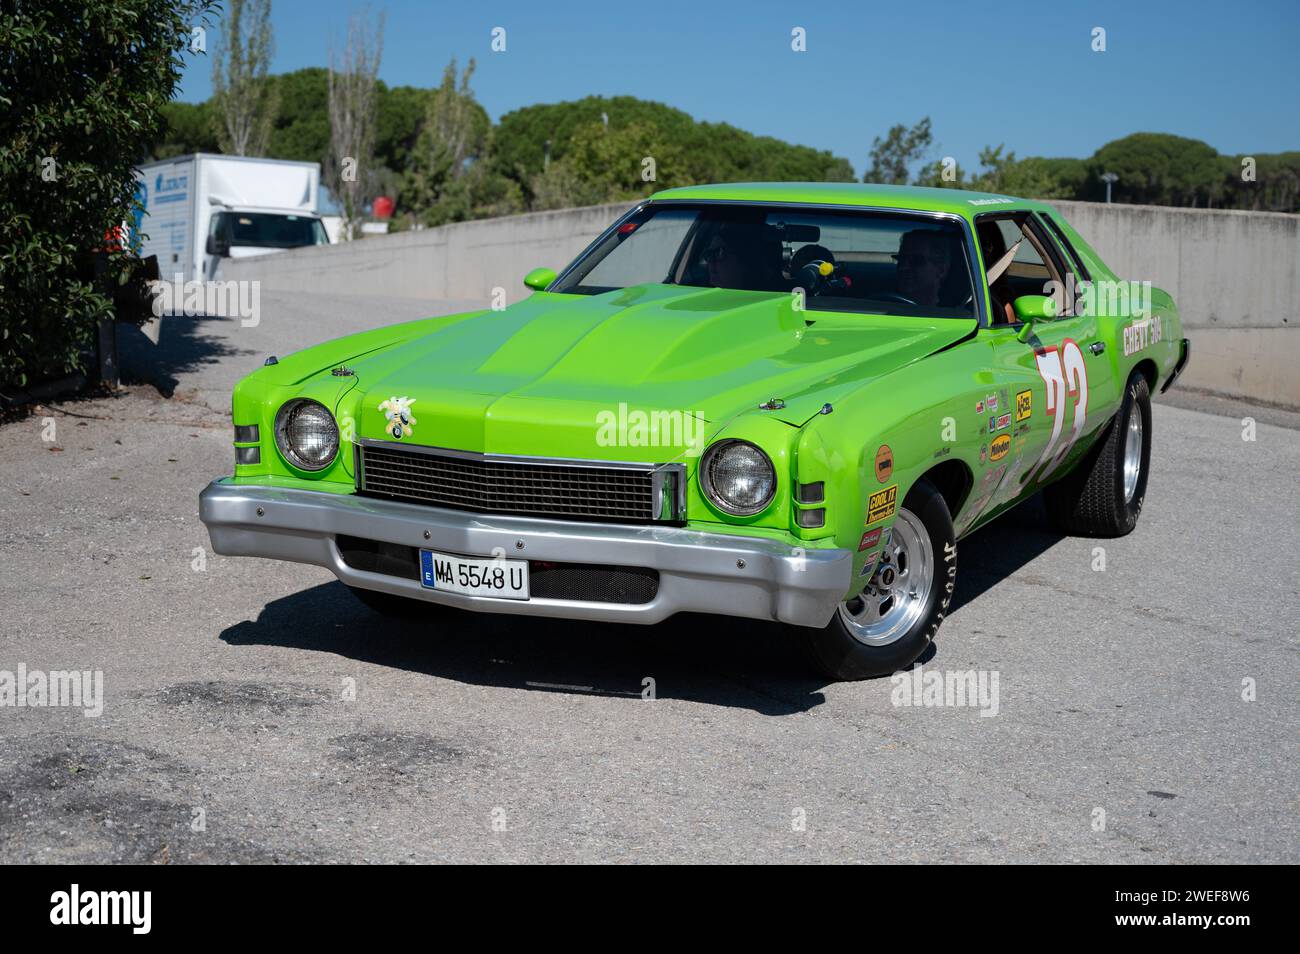 Front view of an impressive green second-generation Chevrolet Monte Carlo American muscle car prepared for quarter-mile drag racing Stock Photo